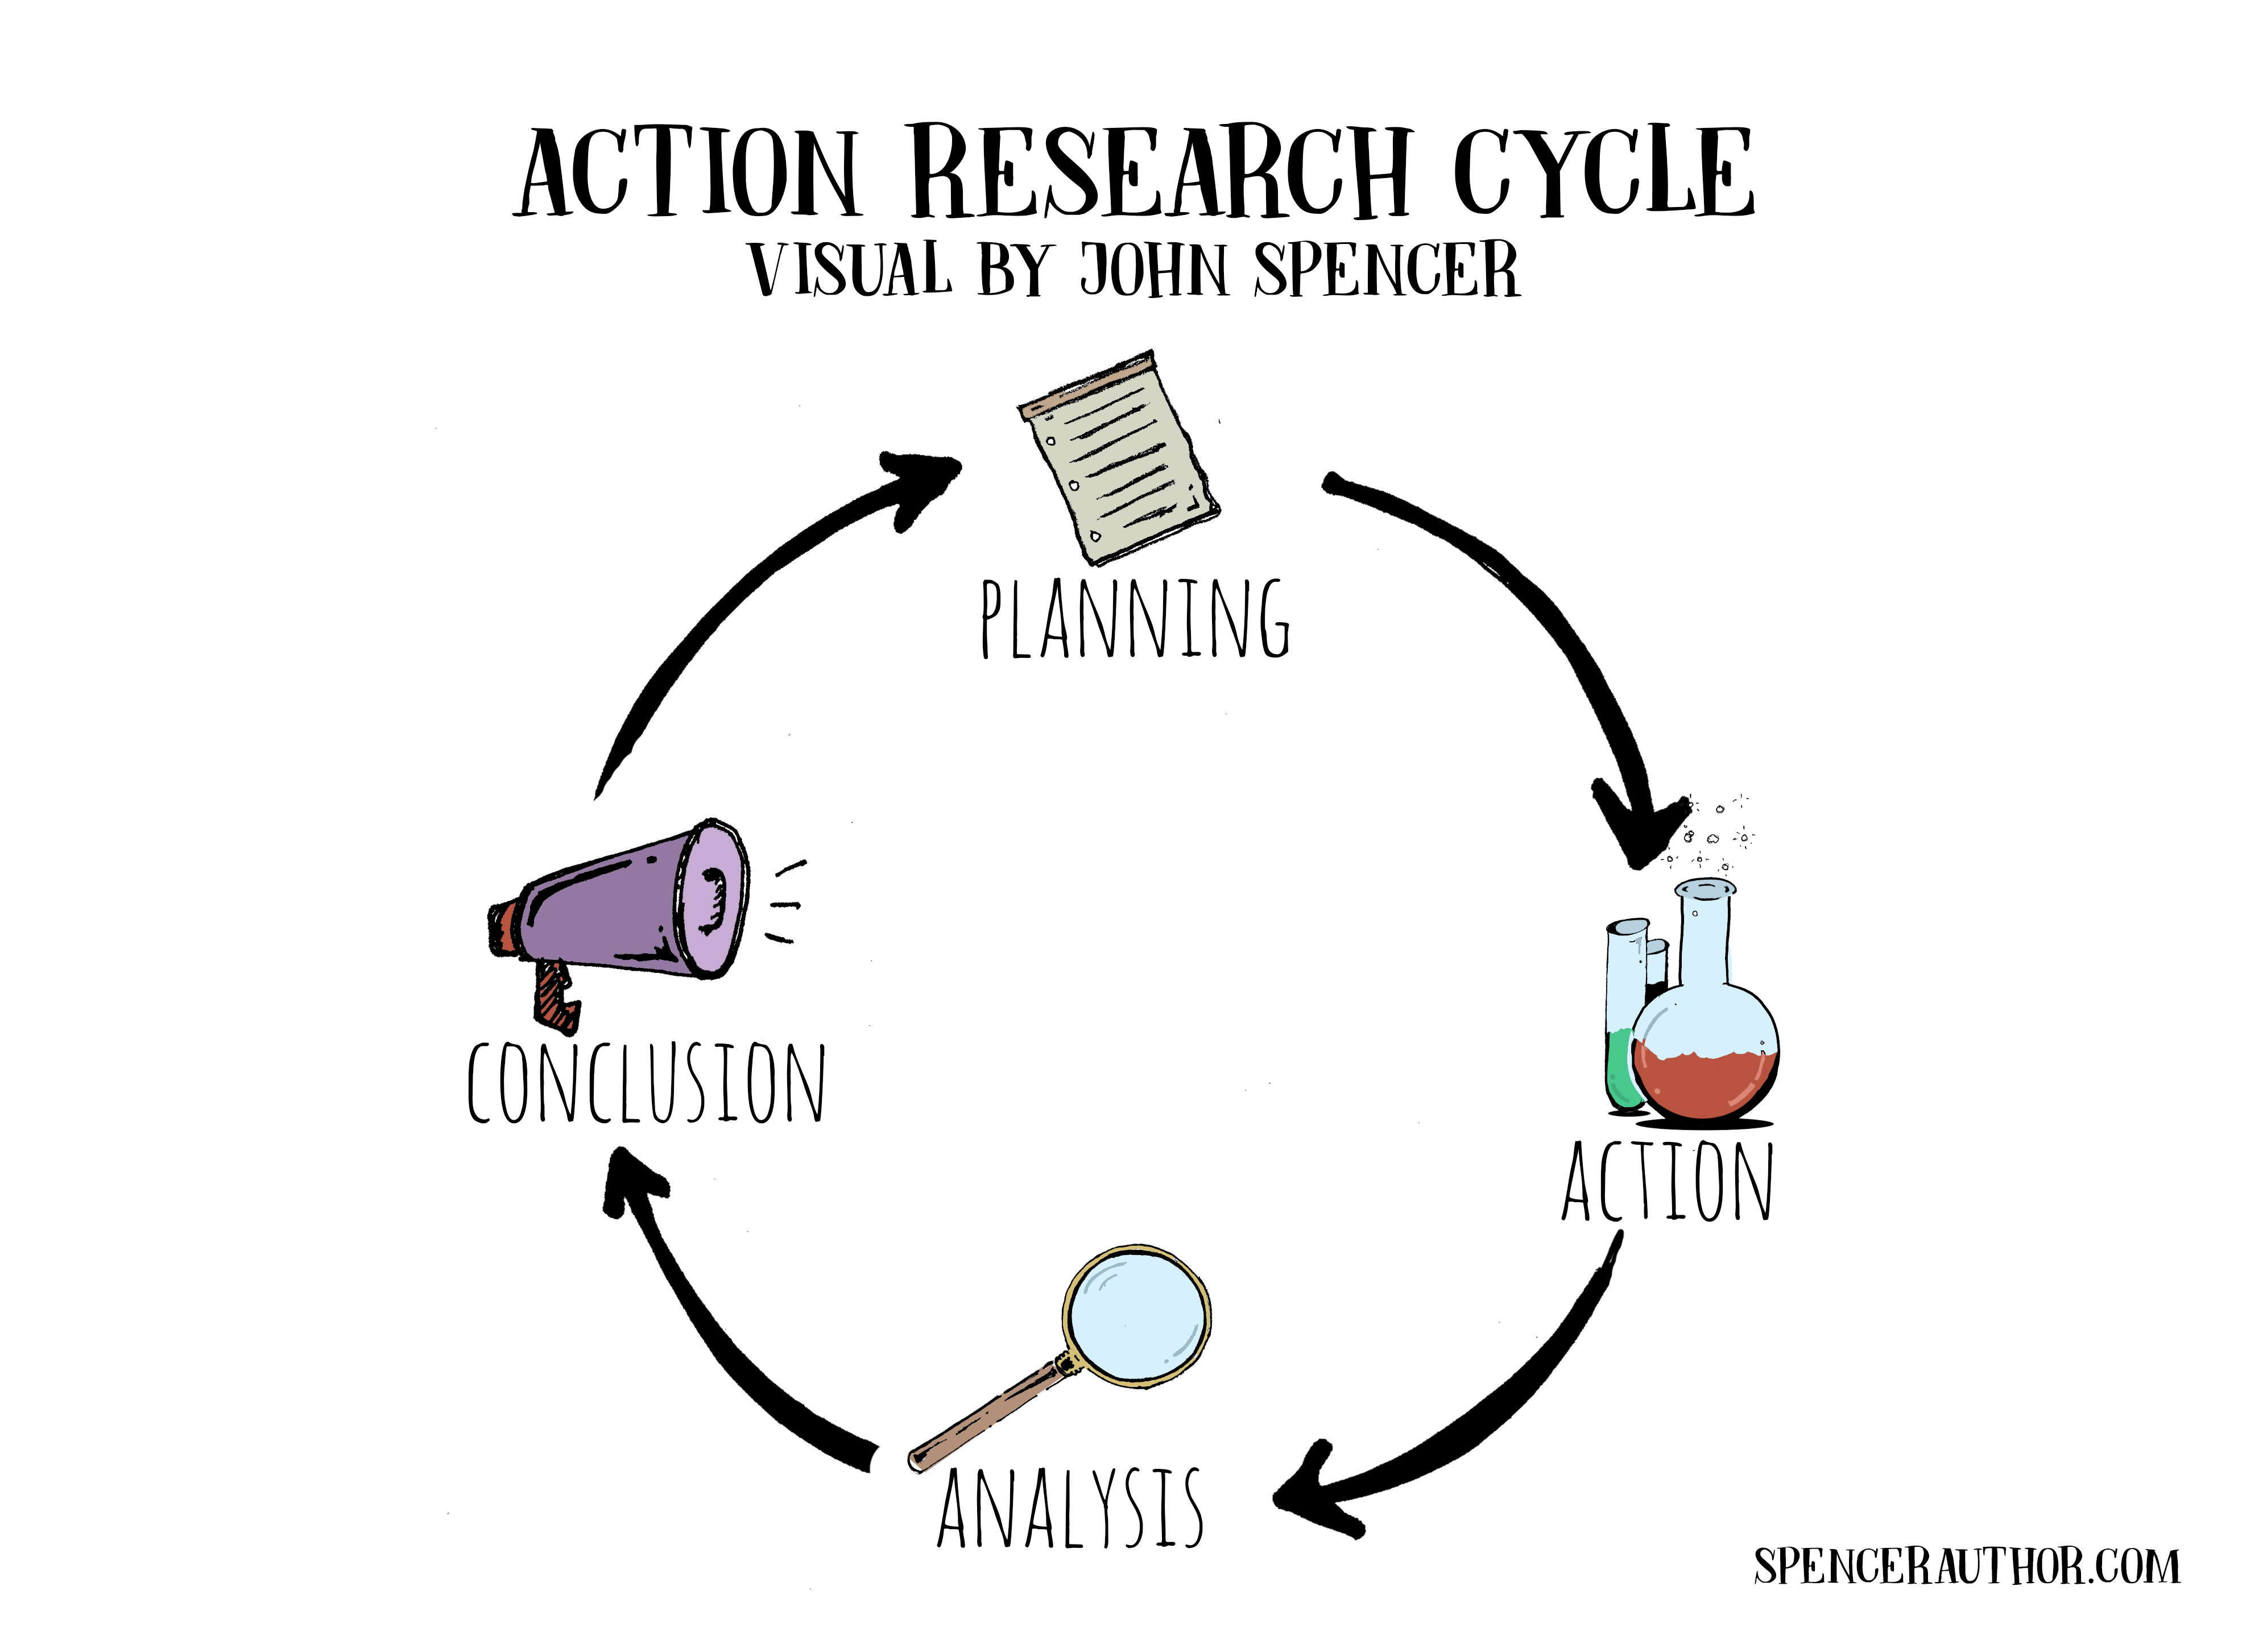 action research examples in english language teaching